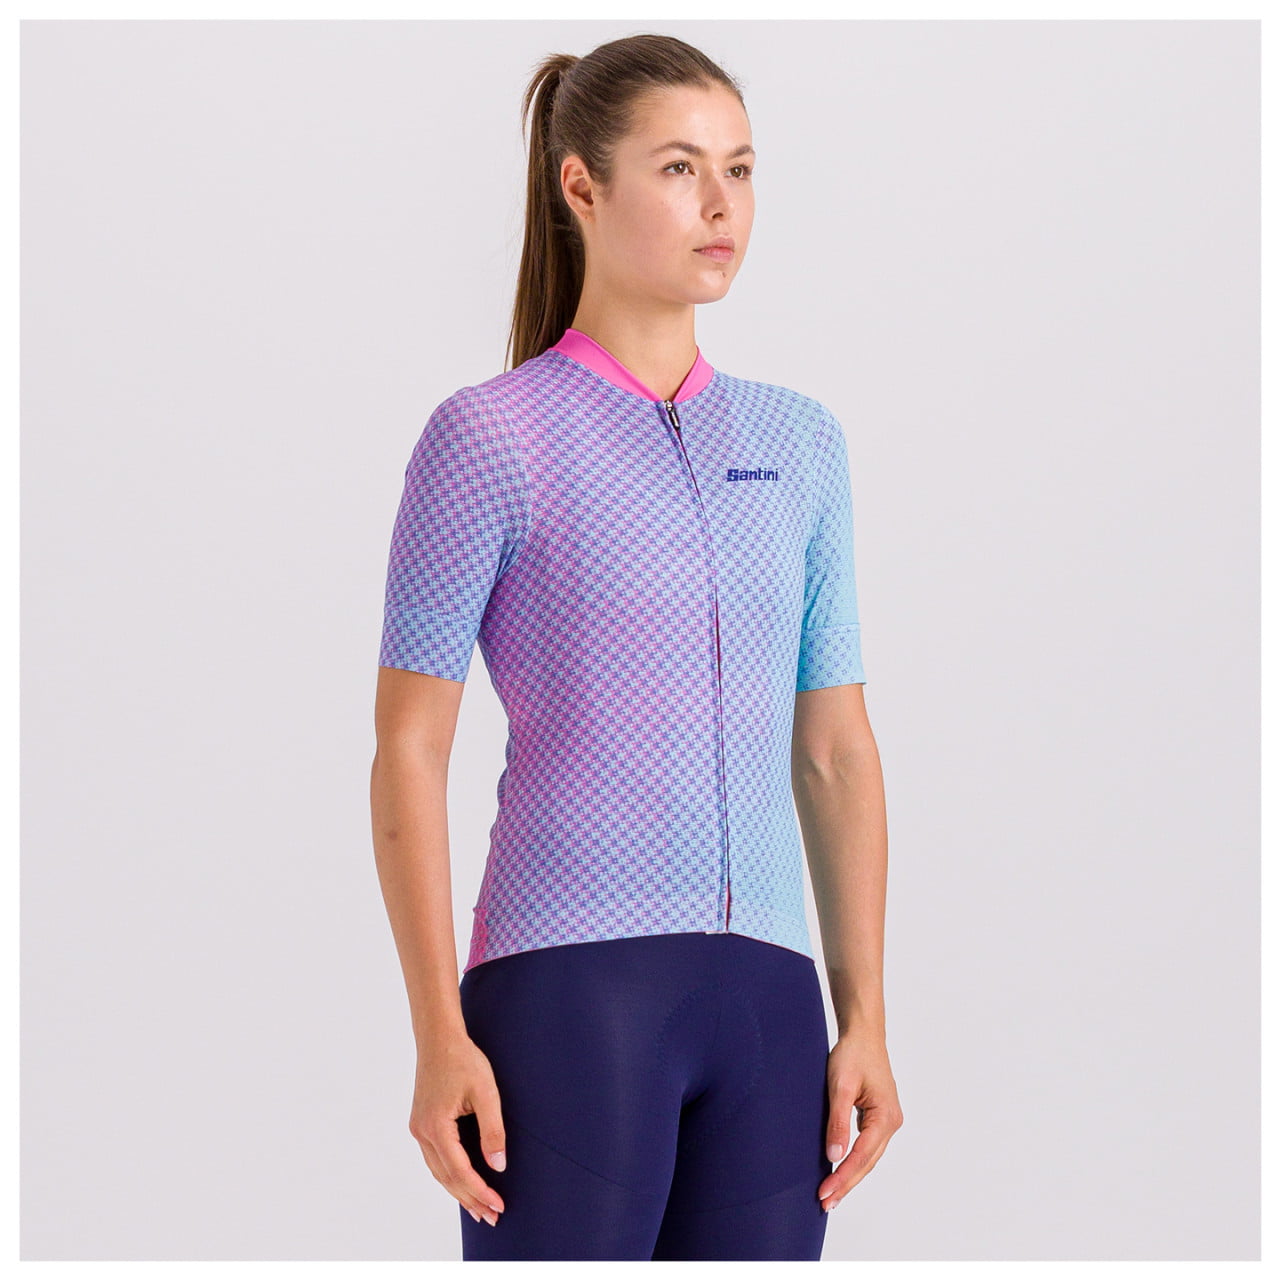 Women's Short Sleeve Jersey Paws Forma